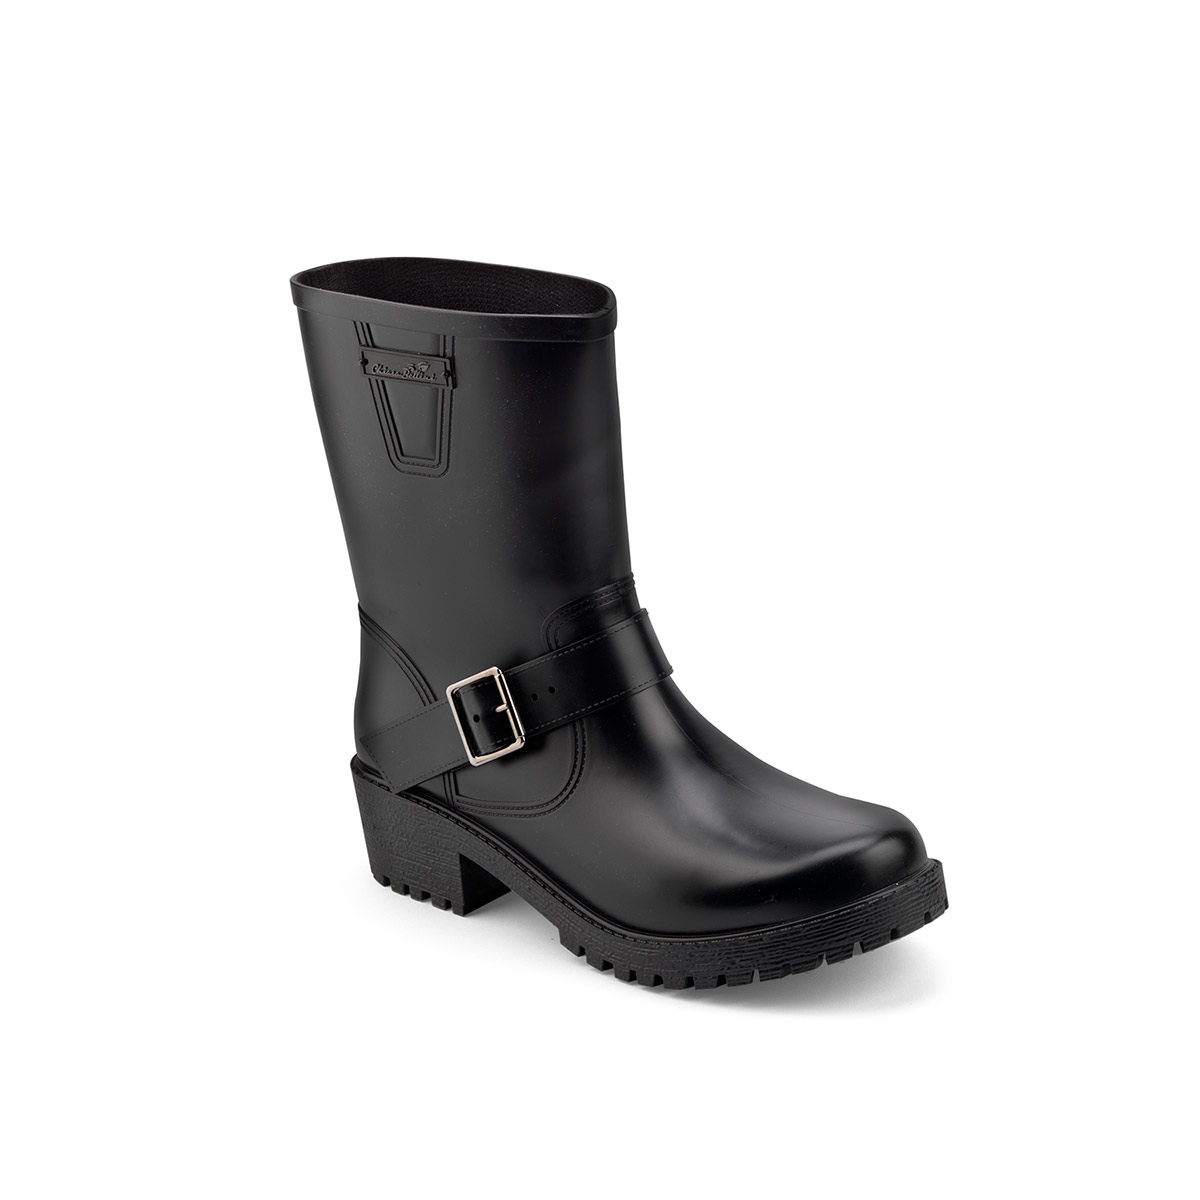 Pvc Biker boot for women with strap